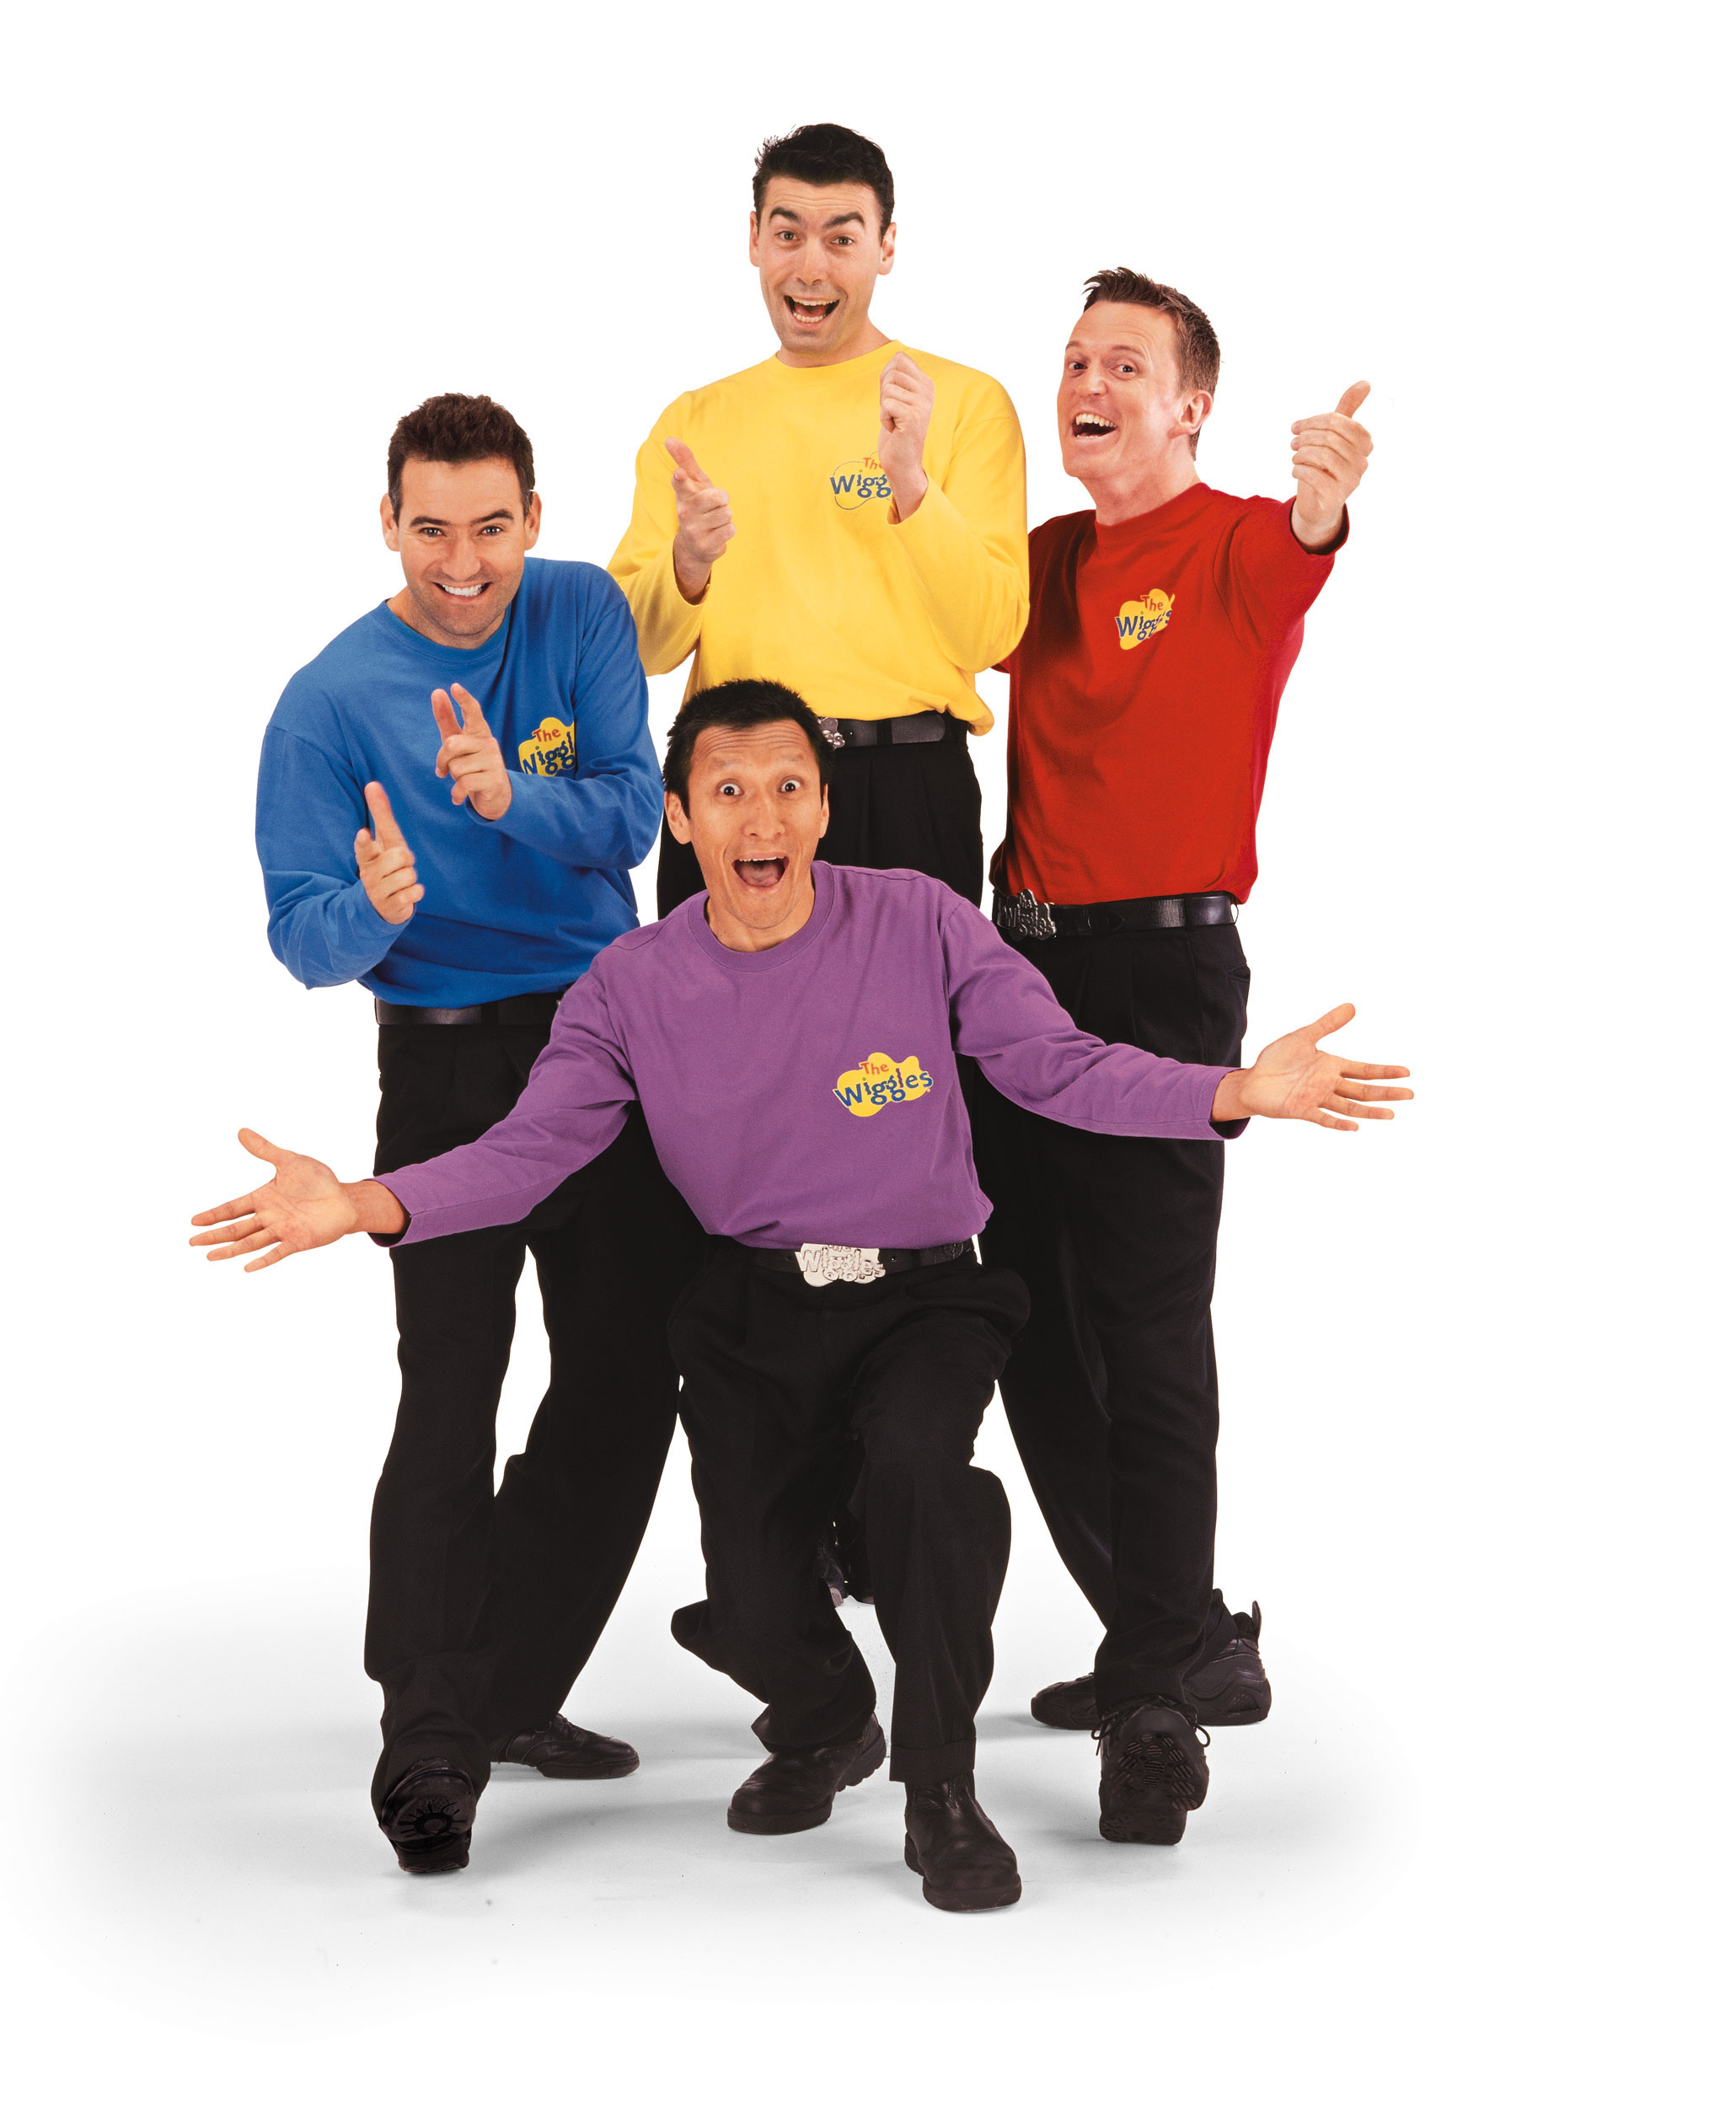 Wiggles Videos Preview#Gallery Wiggly Wiggly World Friends/Gallery.